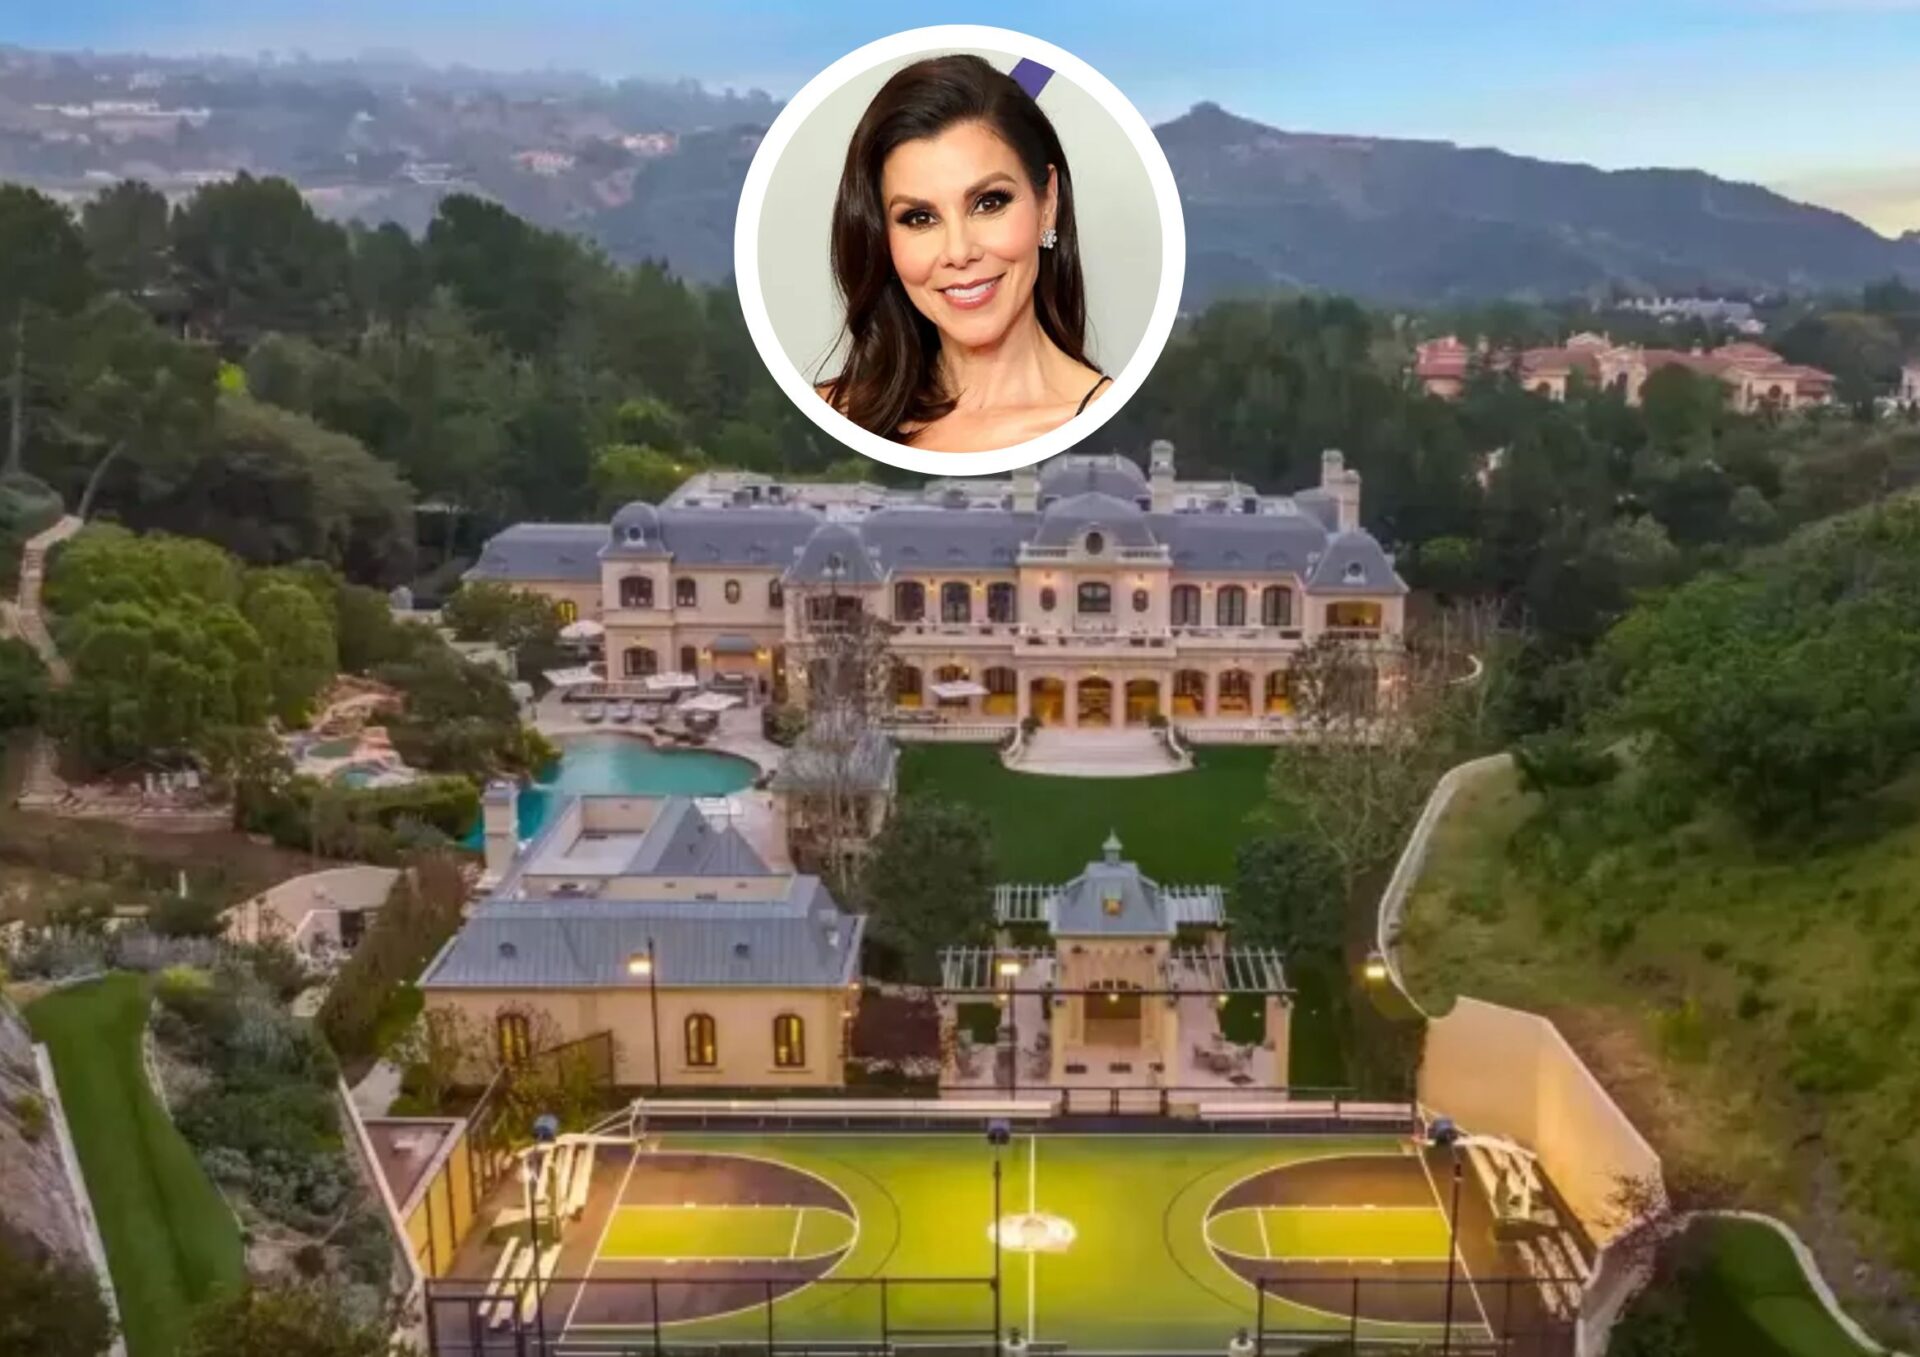 Main Image of Heather Dubrow Estate